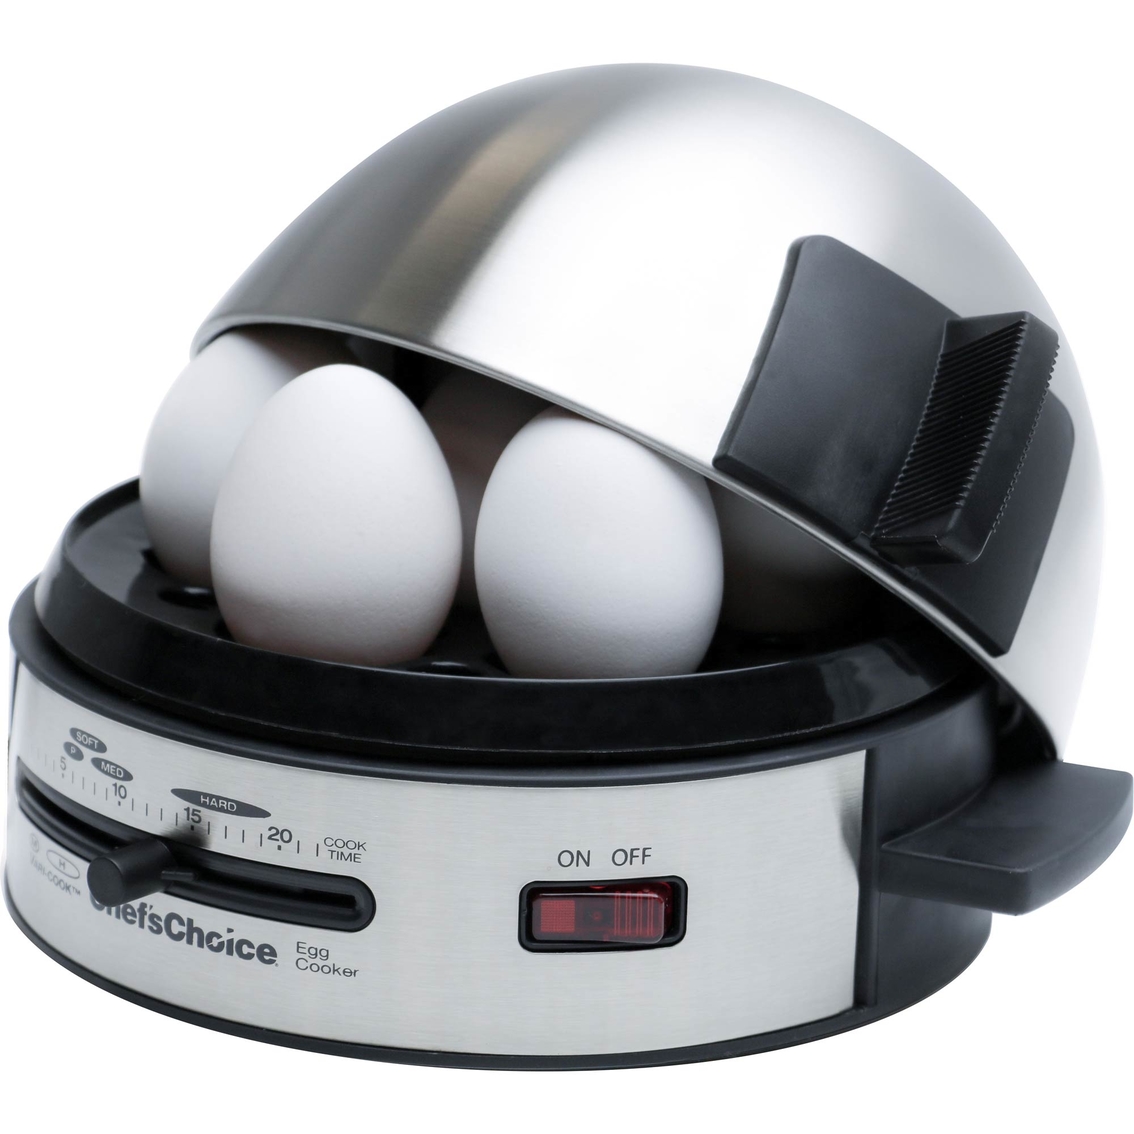 Chef's Choice Gourmet Egg Cooker - Image 2 of 6